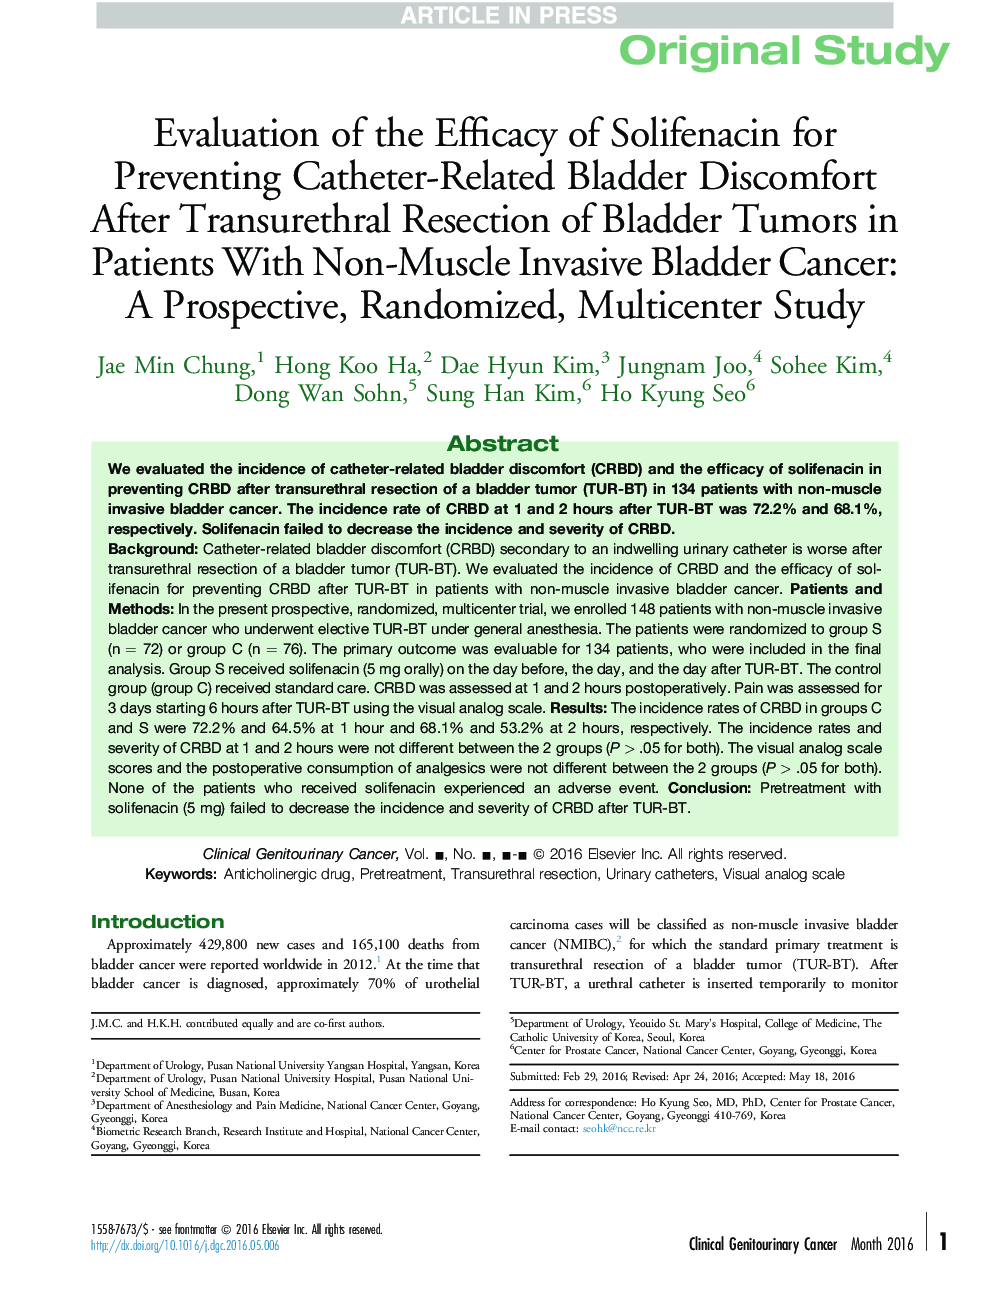 Evaluation of the Efficacy of Solifenacin for Preventing Catheter-Related Bladder Discomfort After Transurethral Resection of Bladder Tumors in Patients With Non-Muscle Invasive Bladder Cancer: A Prospective, Randomized, Multicenter Study